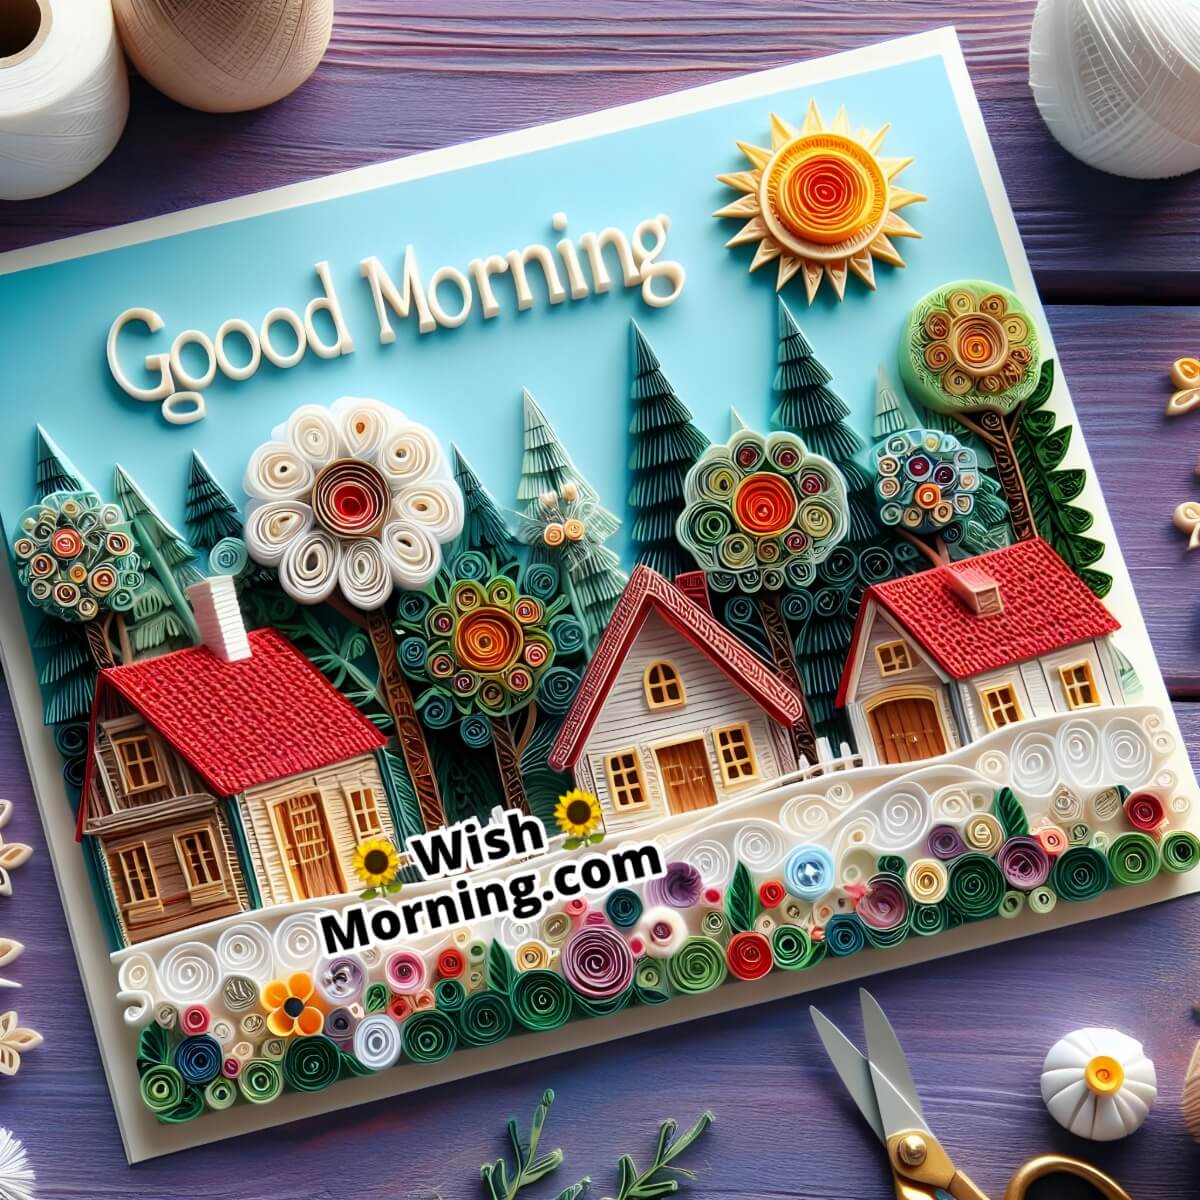 Good Morning Quilling Art Image